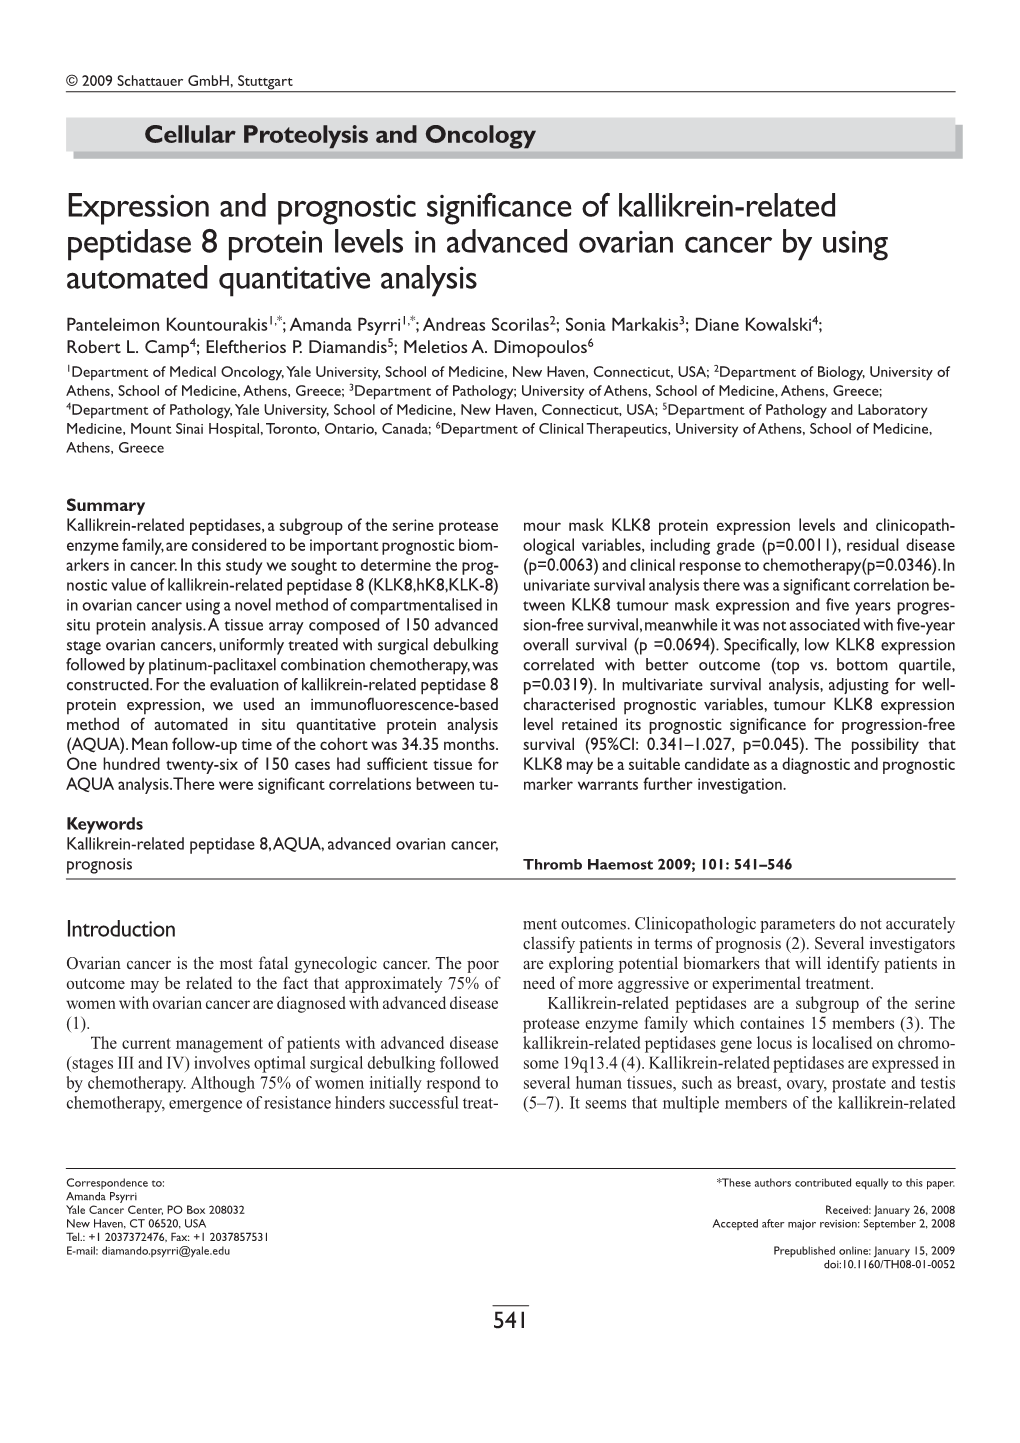 Expression and Prognostic Significance of Kallikrein-Related Peptidase 8 Protein Levels in Advanced Ovarian Cancer by Using Automated Quantitative Analysis